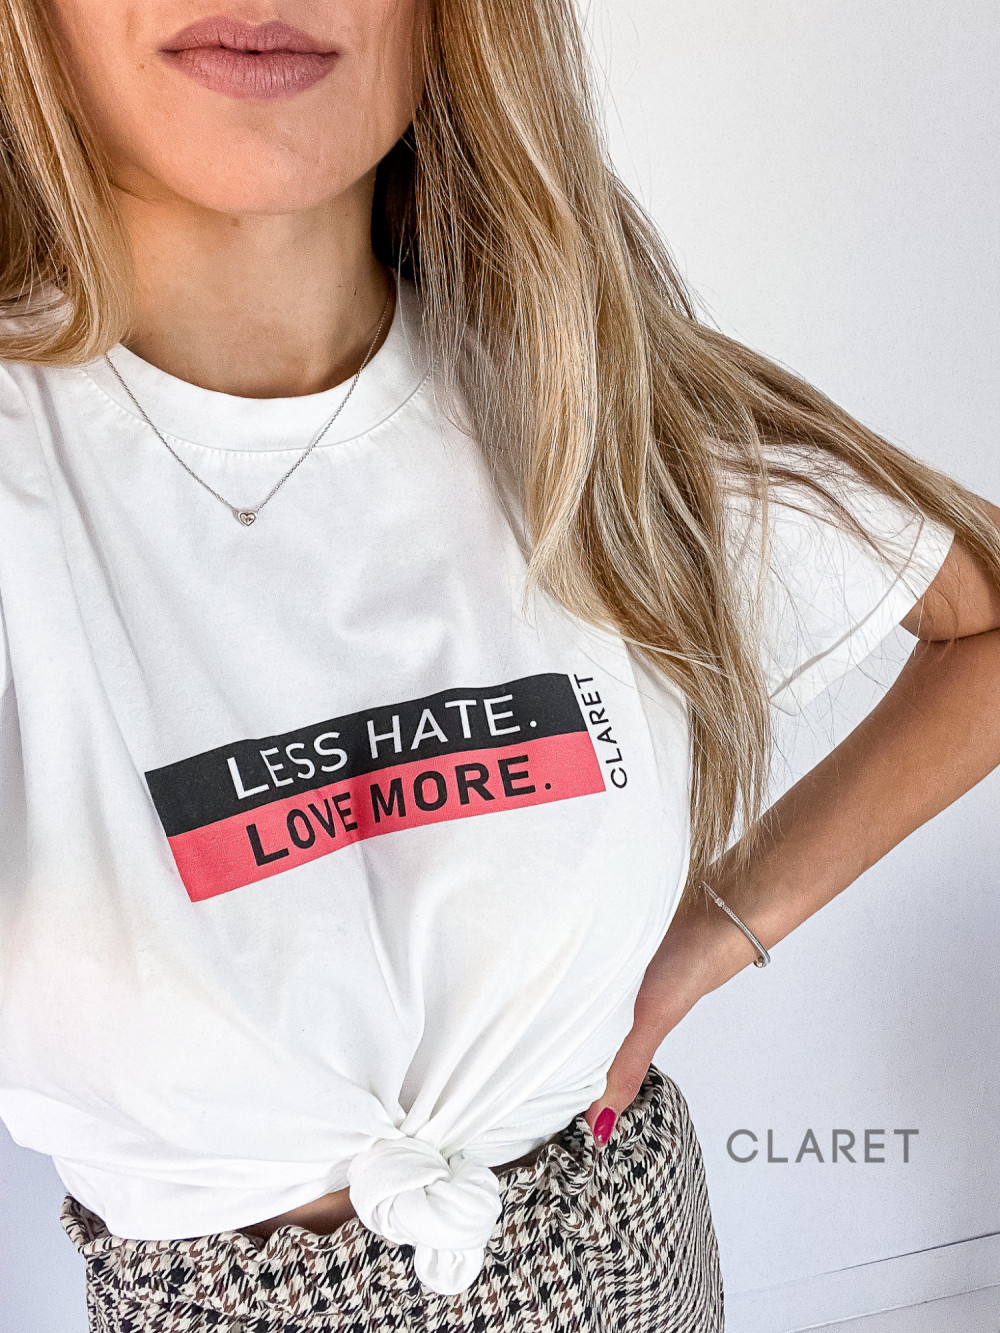 T-SHIRT BY CLARET COLLECTION - LESS HATE, LOVE MORE